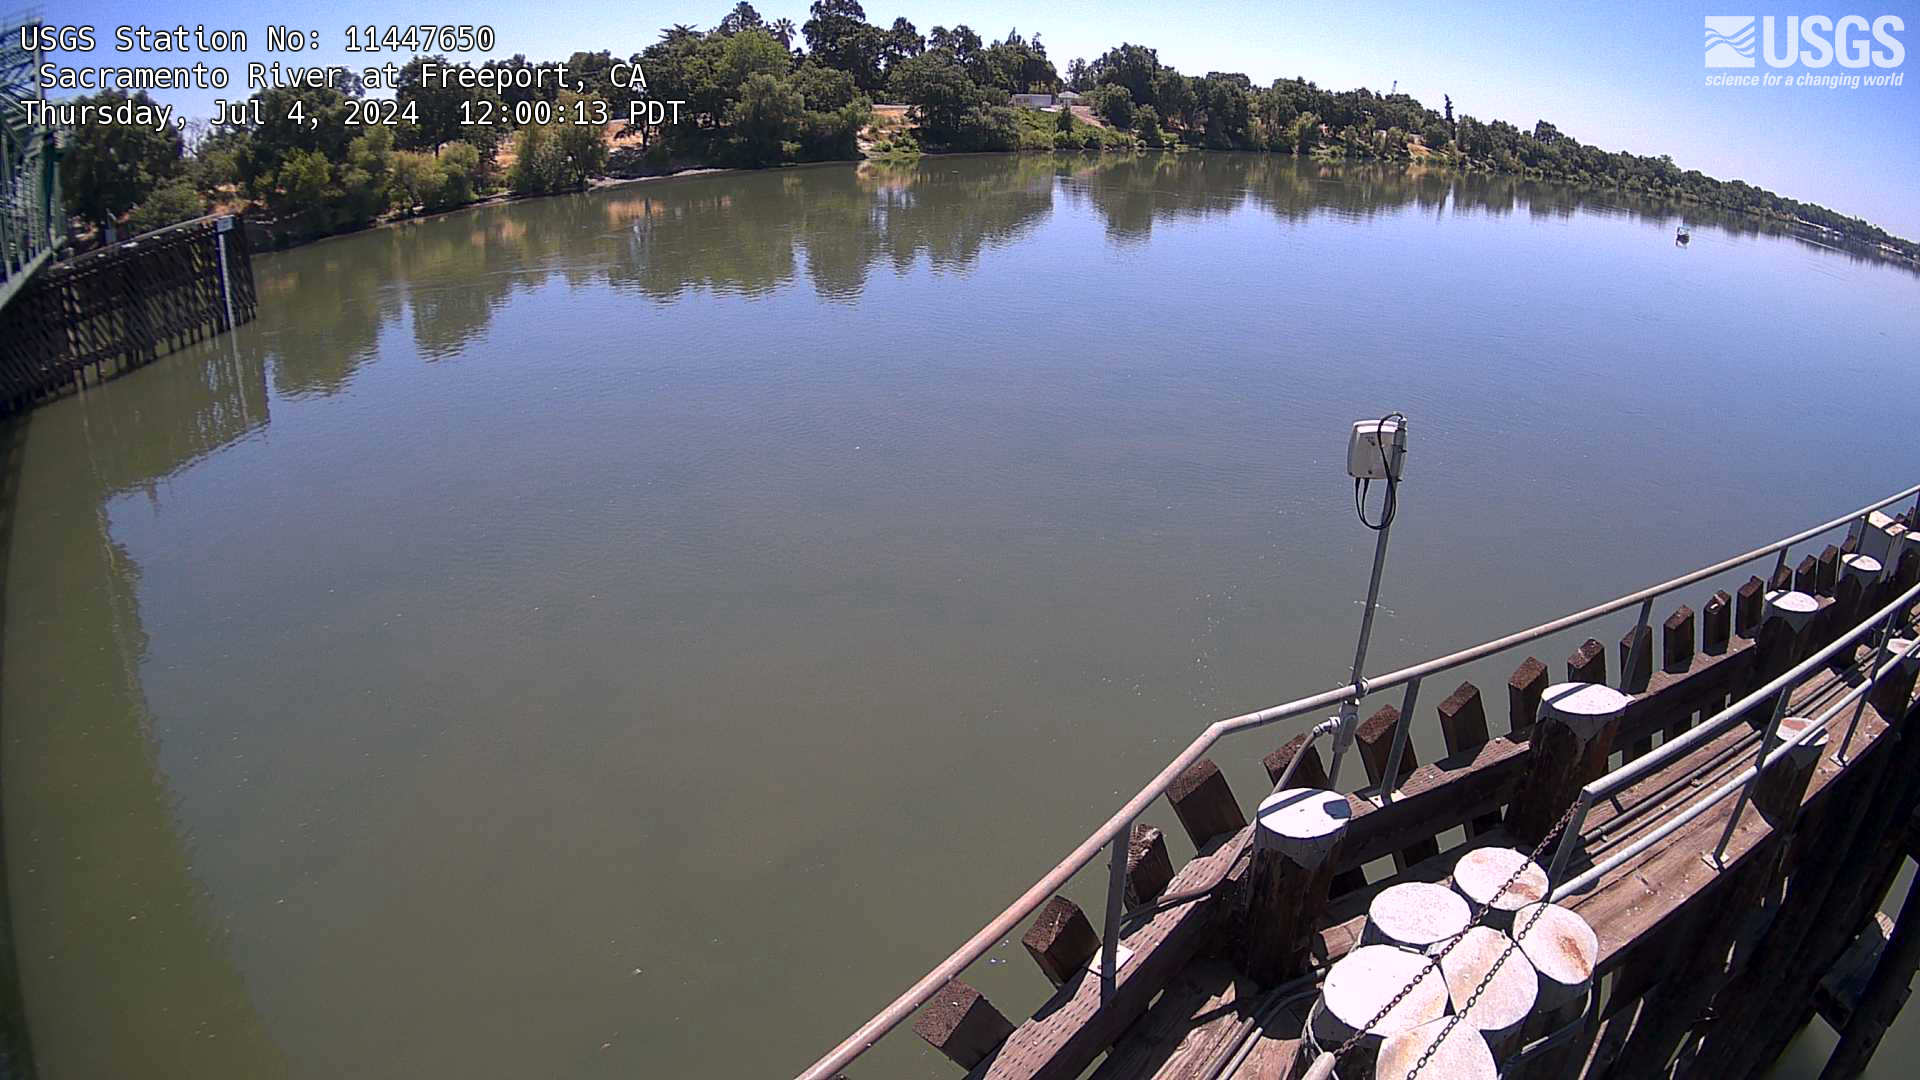 This is the most recent camera image of Sacramento River at Freeport webcam.